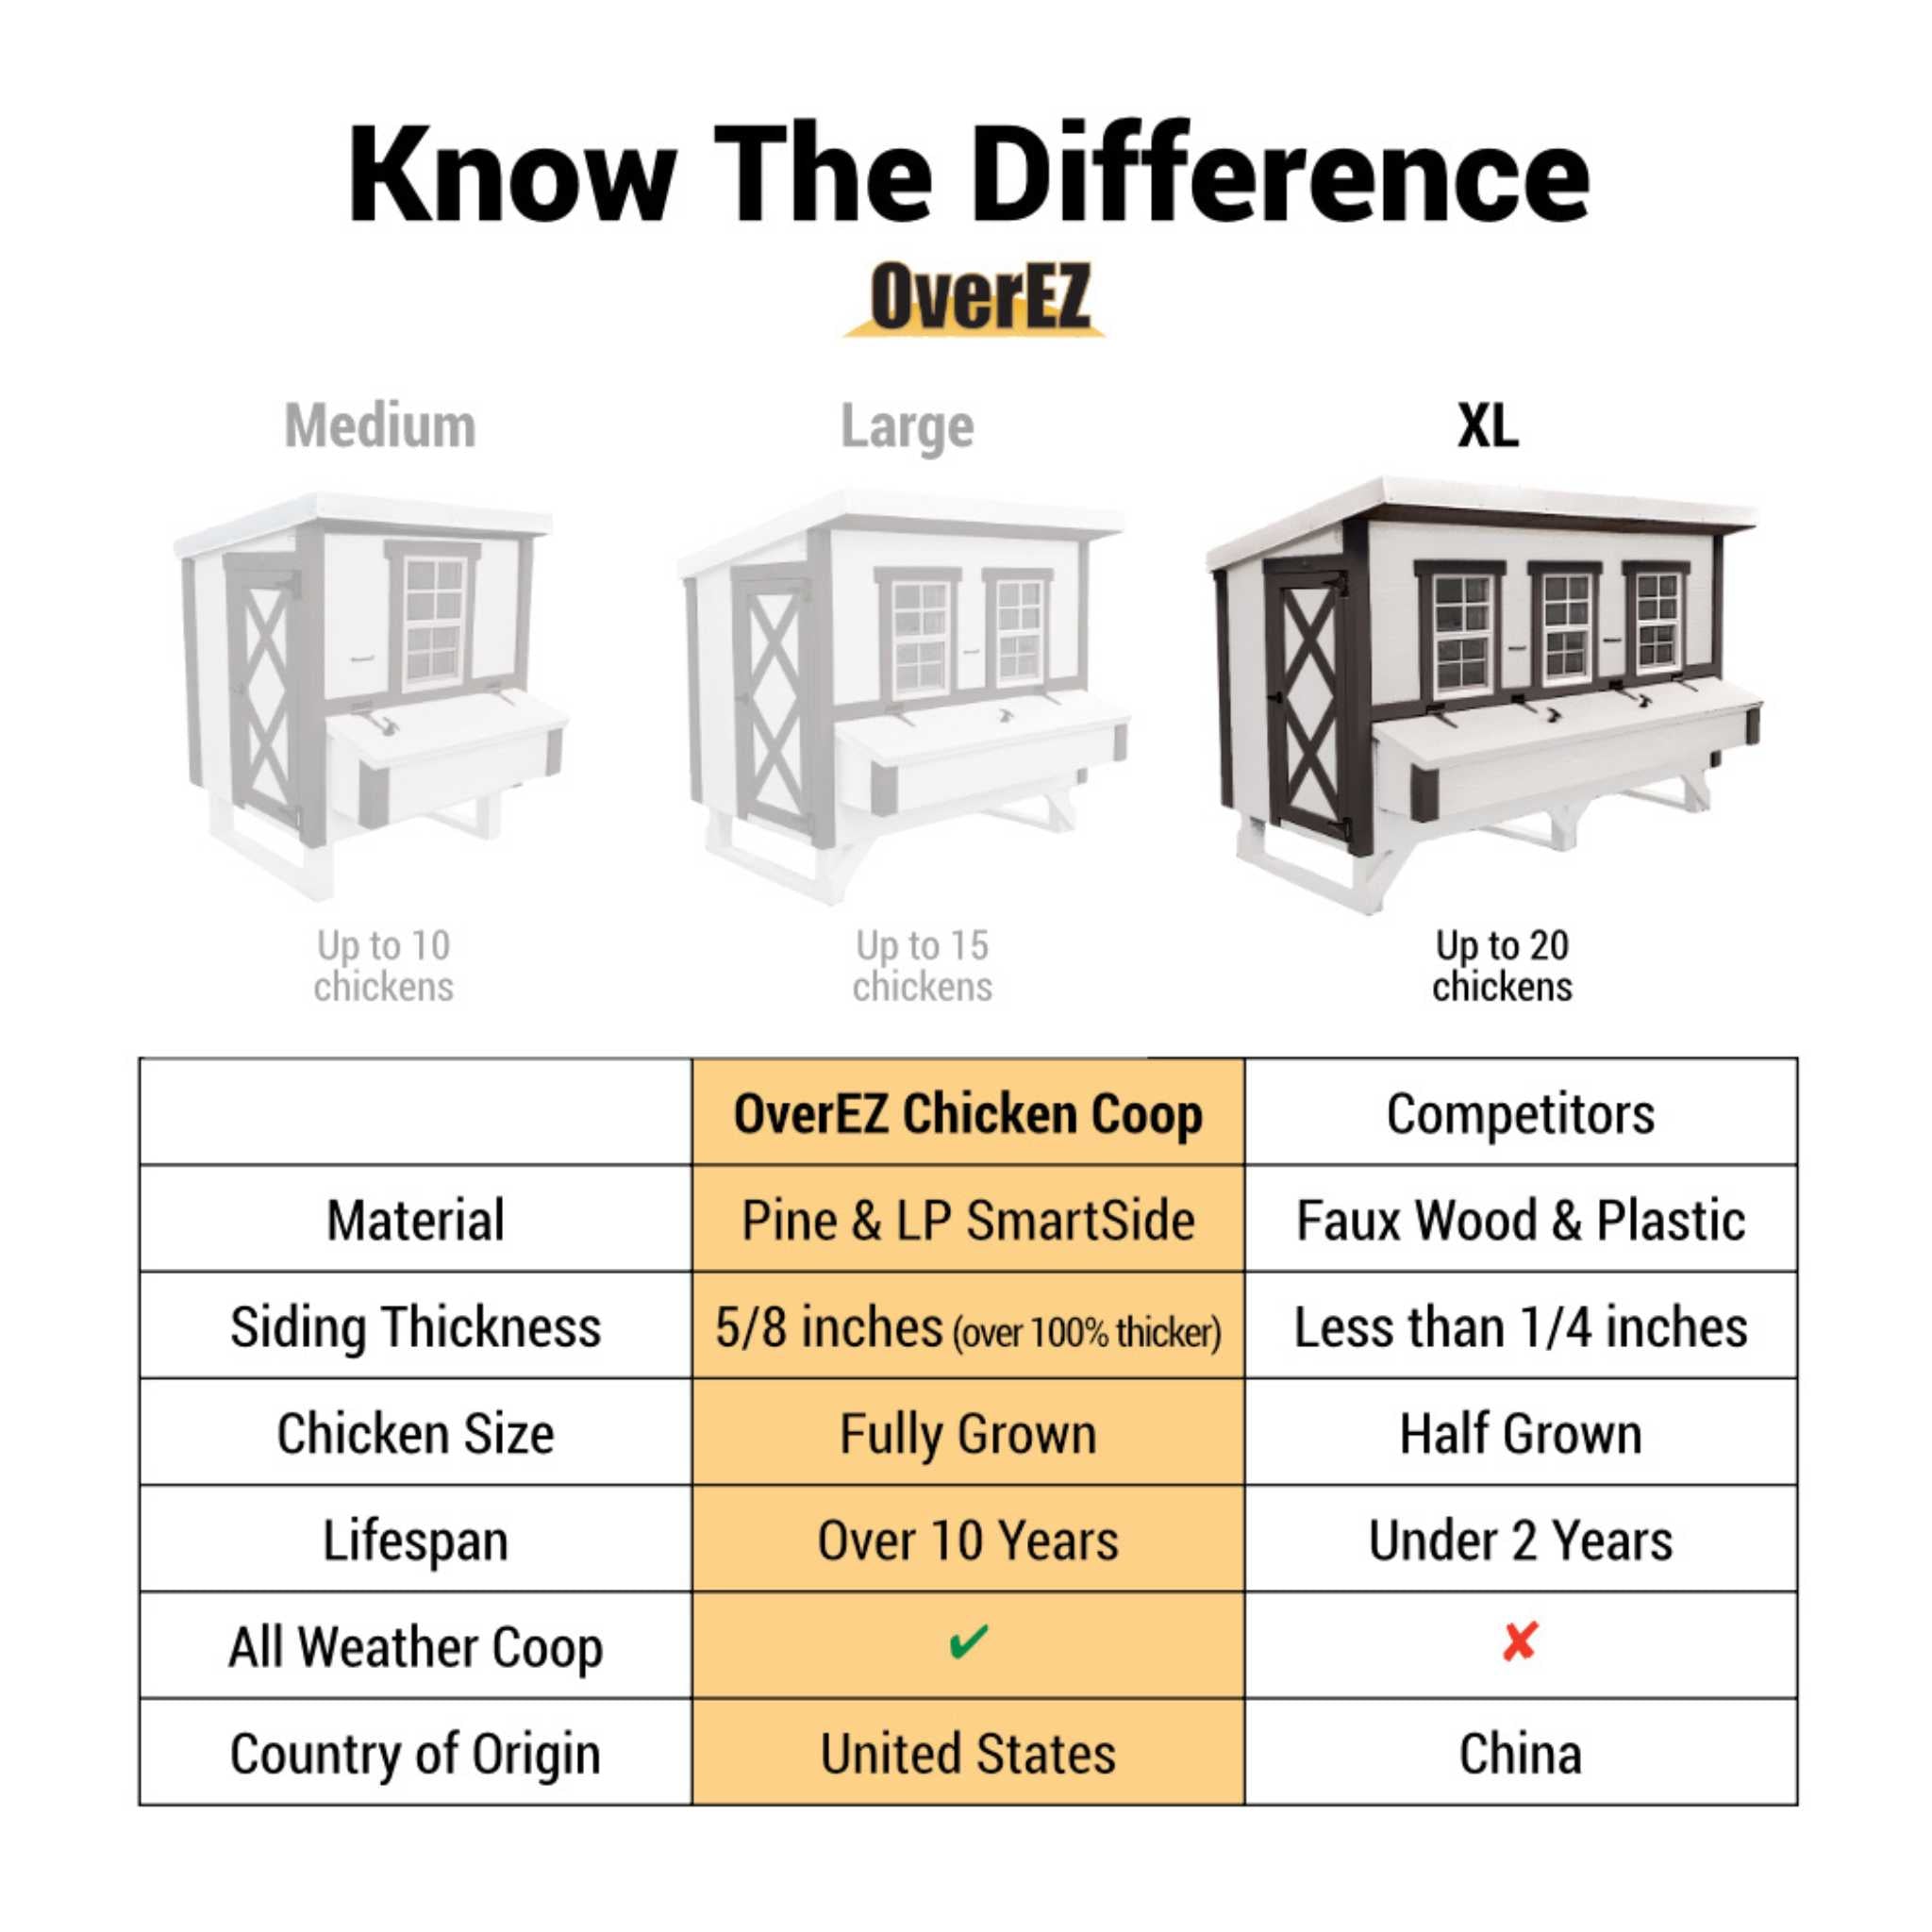 Hatching Time OverEZ. XL chicken coop is highlighted in infographic. XL chicken coop is made with Pine and LP SmartSide material,  is 5/8 of an inch thick for fully grown chickens and can last over 10 years.